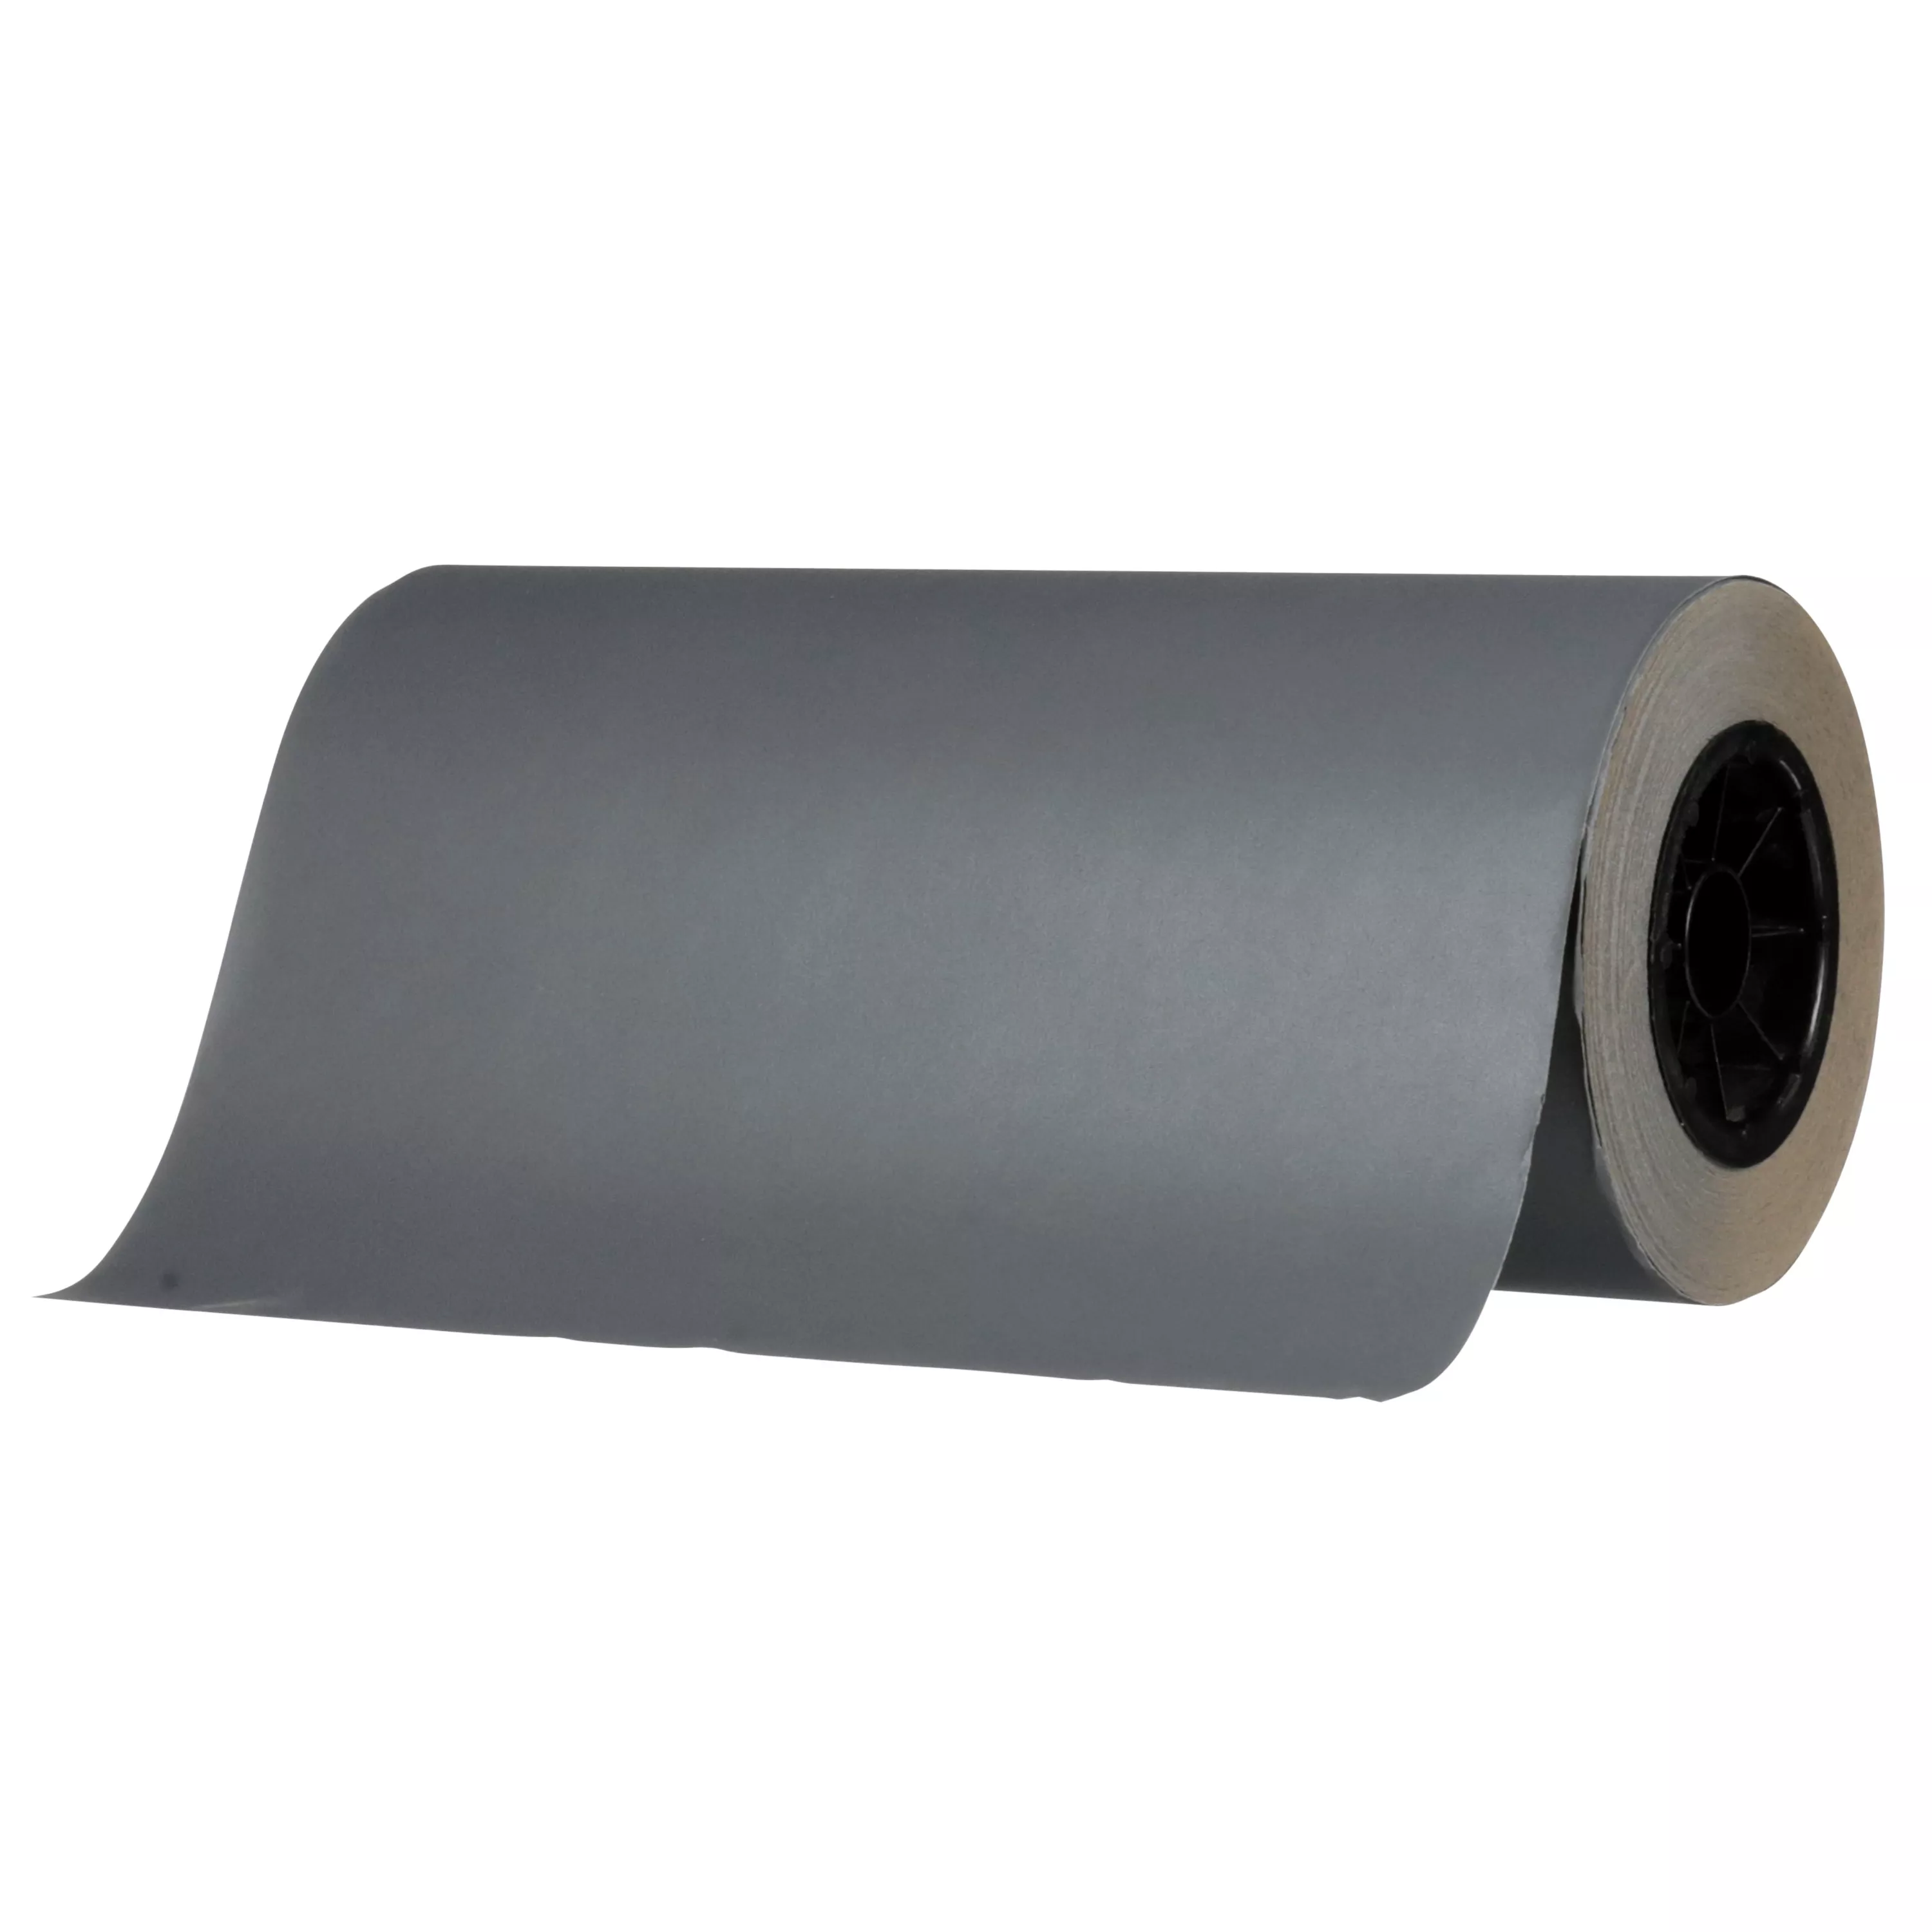 Product Number 413Q | 3M™ Wetordry™ Paper Roll 413Q